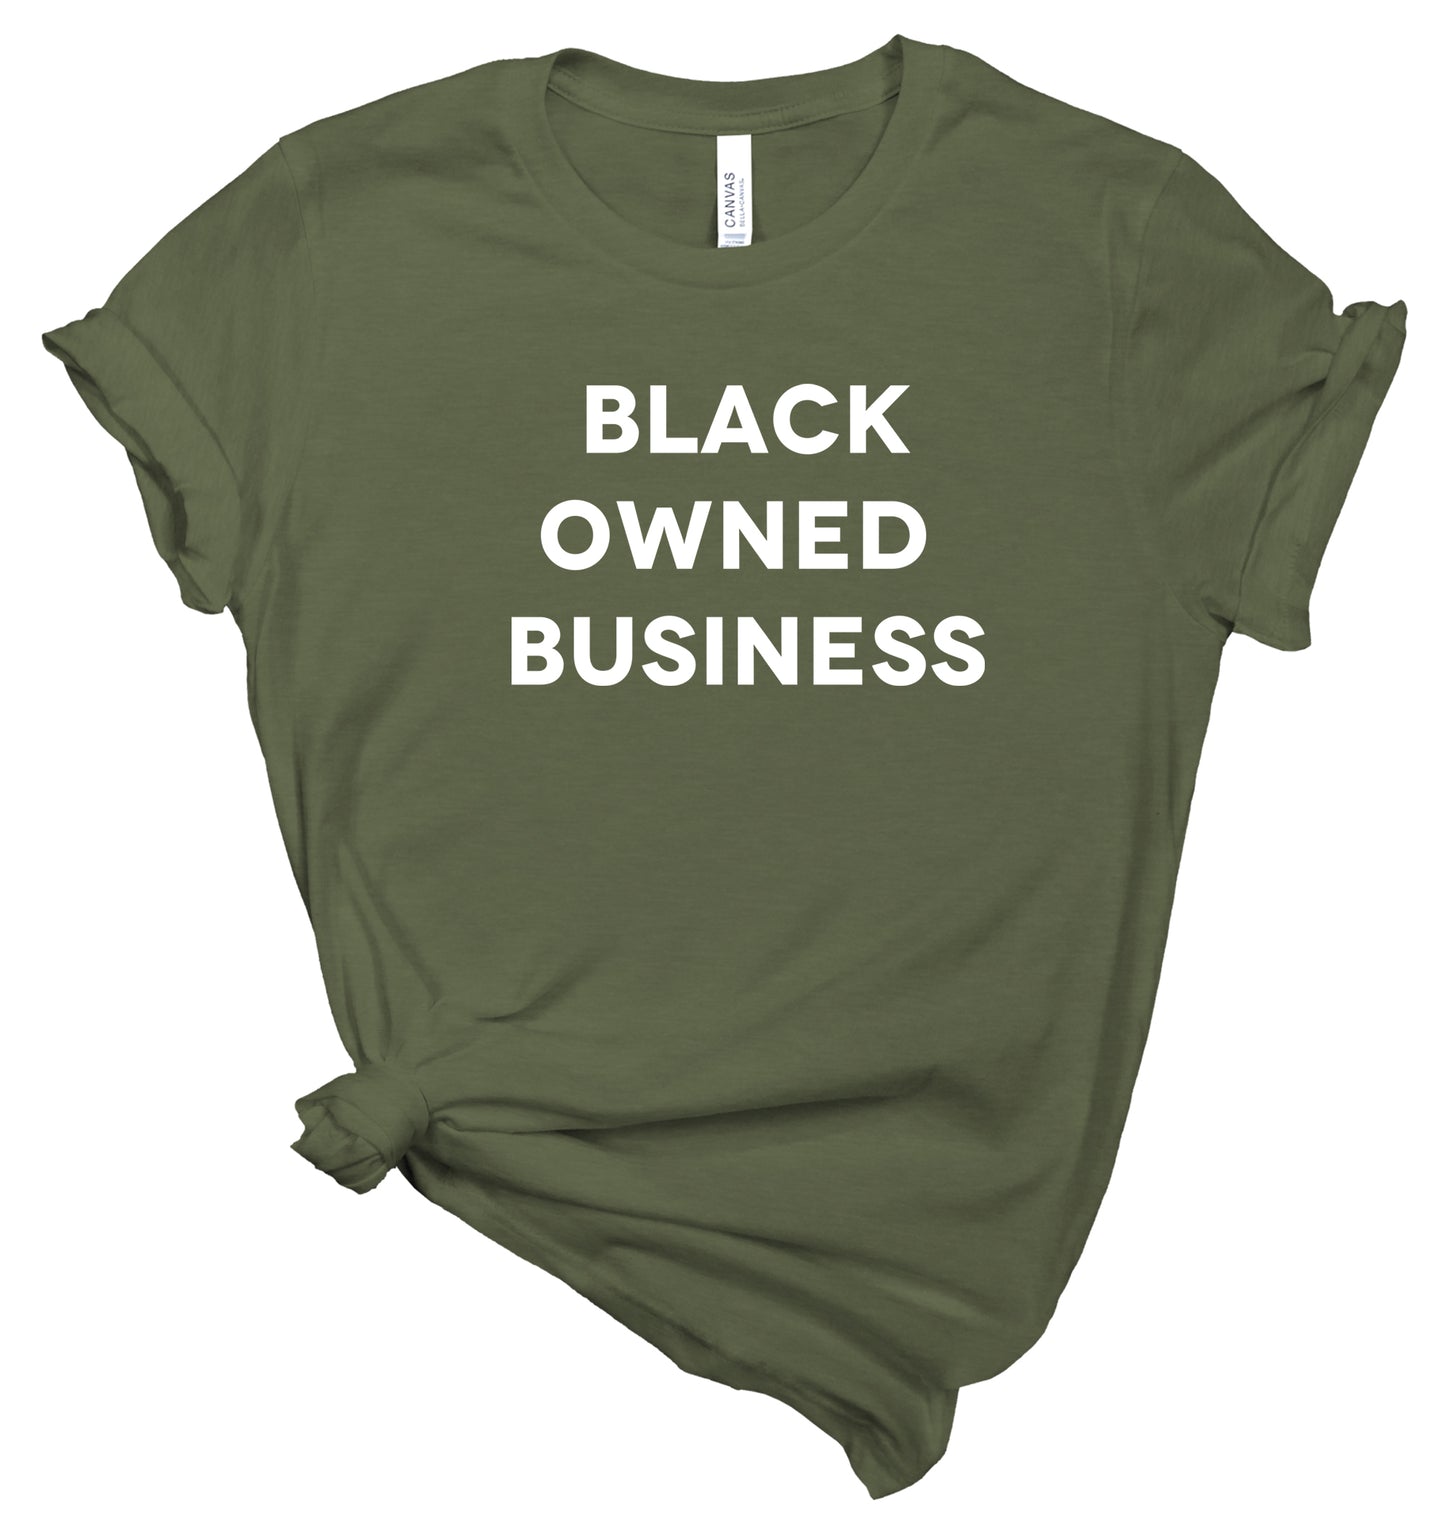 Black Owned Business T-Shirt - Support Black Owned Business Shirt